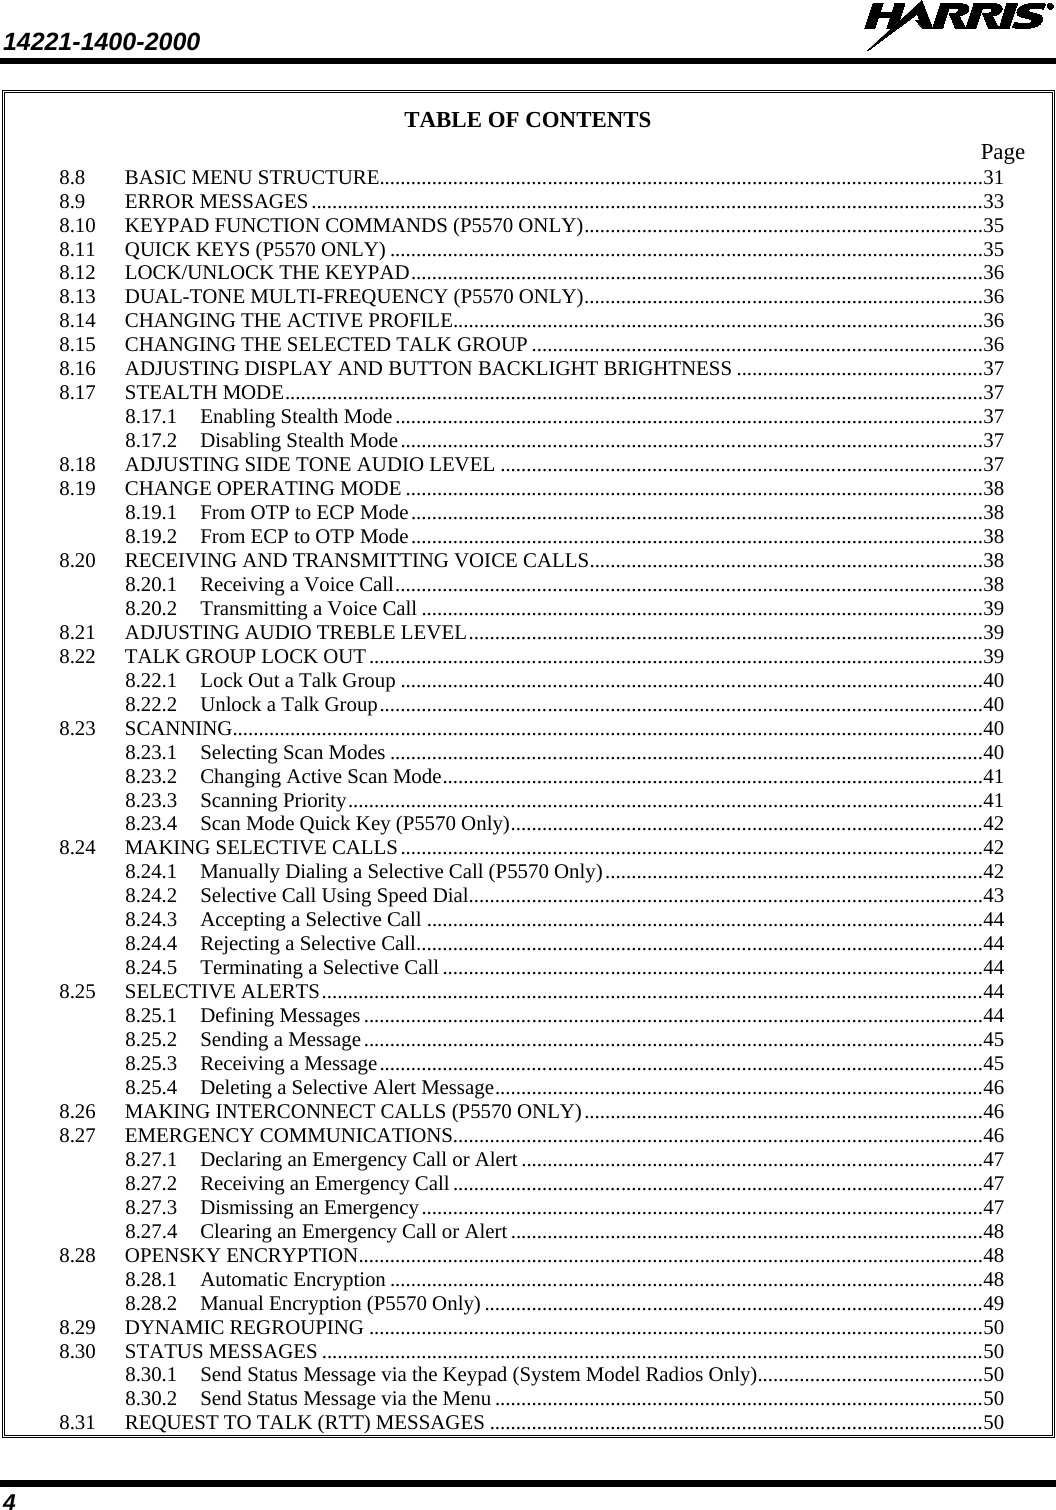 14221-1400-2000    4 TABLE OF CONTENTS Page 8.8 BASIC MENU STRUCTURE................................................................................................................... 31 8.9 ERROR MESSAGES ................................................................................................................................ 33 8.10 KEYPAD FUNCTION COMMANDS (P5570 ONLY) ............................................................................ 35 8.11 QUICK KEYS (P5570 ONLY) ................................................................................................................. 35 8.12 LOCK/UNLOCK THE KEYPAD ............................................................................................................. 36 8.13 DUAL-TONE MULTI-FREQUENCY (P5570 ONLY) ............................................................................ 36 8.14 CHANGING THE ACTIVE PROFILE ..................................................................................................... 36 8.15 CHANGING THE SELECTED TALK GROUP ...................................................................................... 36 8.16 ADJUSTING DISPLAY AND BUTTON BACKLIGHT BRIGHTNESS ............................................... 37 8.17 STEALTH MODE ..................................................................................................................................... 37 8.17.1 Enabling Stealth Mode ................................................................................................................ 37 8.17.2 Disabling Stealth Mode ............................................................................................................... 37 8.18 ADJUSTING SIDE TONE AUDIO LEVEL ............................................................................................ 37 8.19 CHANGE OPERATING MODE .............................................................................................................. 38 8.19.1 From OTP to ECP Mode ............................................................................................................. 38 8.19.2 From ECP to OTP Mode ............................................................................................................. 38 8.20 RECEIVING AND TRANSMITTING VOICE CALLS ........................................................................... 38 8.20.1 Receiving a Voice Call ................................................................................................................ 38 8.20.2 Transmitting a Voice Call ........................................................................................................... 39 8.21 ADJUSTING AUDIO TREBLE LEVEL .................................................................................................. 39 8.22 TALK GROUP LOCK OUT ..................................................................................................................... 39 8.22.1 Lock Out a Talk Group ............................................................................................................... 40 8.22.2 Unlock a Talk Group ................................................................................................................... 40 8.23 SCANNING............................................................................................................................................... 40 8.23.1 Selecting Scan Modes ................................................................................................................. 40 8.23.2 Changing Active Scan Mode ....................................................................................................... 41 8.23.3 Scanning Priority ......................................................................................................................... 41 8.23.4 Scan Mode Quick Key (P5570 Only) .......................................................................................... 42 8.24 MAKING SELECTIVE CALLS ............................................................................................................... 42 8.24.1 Manually Dialing a Selective Call (P5570 Only) ........................................................................ 42 8.24.2 Selective Call Using Speed Dial.................................................................................................. 43 8.24.3 Accepting a Selective Call .......................................................................................................... 44 8.24.4 Rejecting a Selective Call ............................................................................................................ 44 8.24.5 Terminating a Selective Call ....................................................................................................... 44 8.25 SELECTIVE ALERTS .............................................................................................................................. 44 8.25.1 Defining Messages ...................................................................................................................... 44 8.25.2 Sending a Message ...................................................................................................................... 45 8.25.3 Receiving a Message ................................................................................................................... 45 8.25.4 Deleting a Selective Alert Message ............................................................................................. 46 8.26 MAKING INTERCONNECT CALLS (P5570 ONLY) ............................................................................ 46 8.27 EMERGENCY COMMUNICATIONS..................................................................................................... 46 8.27.1 Declaring an Emergency Call or Alert ........................................................................................ 47 8.27.2 Receiving an Emergency Call ..................................................................................................... 47 8.27.3 Dismissing an Emergency ........................................................................................................... 47 8.27.4 Clearing an Emergency Call or Alert .......................................................................................... 48 8.28 OPENSKY ENCRYPTION ....................................................................................................................... 48 8.28.1 Automatic Encryption ................................................................................................................. 48 8.28.2 Manual Encryption (P5570 Only) ............................................................................................... 49 8.29 DYNAMIC REGROUPING ..................................................................................................................... 50 8.30 STATUS MESSAGES .............................................................................................................................. 50 8.30.1 Send Status Message via the Keypad (System Model Radios Only)........................................... 50 8.30.2 Send Status Message via the Menu ............................................................................................. 50 8.31 REQUEST TO TALK (RTT) MESSAGES .............................................................................................. 50 